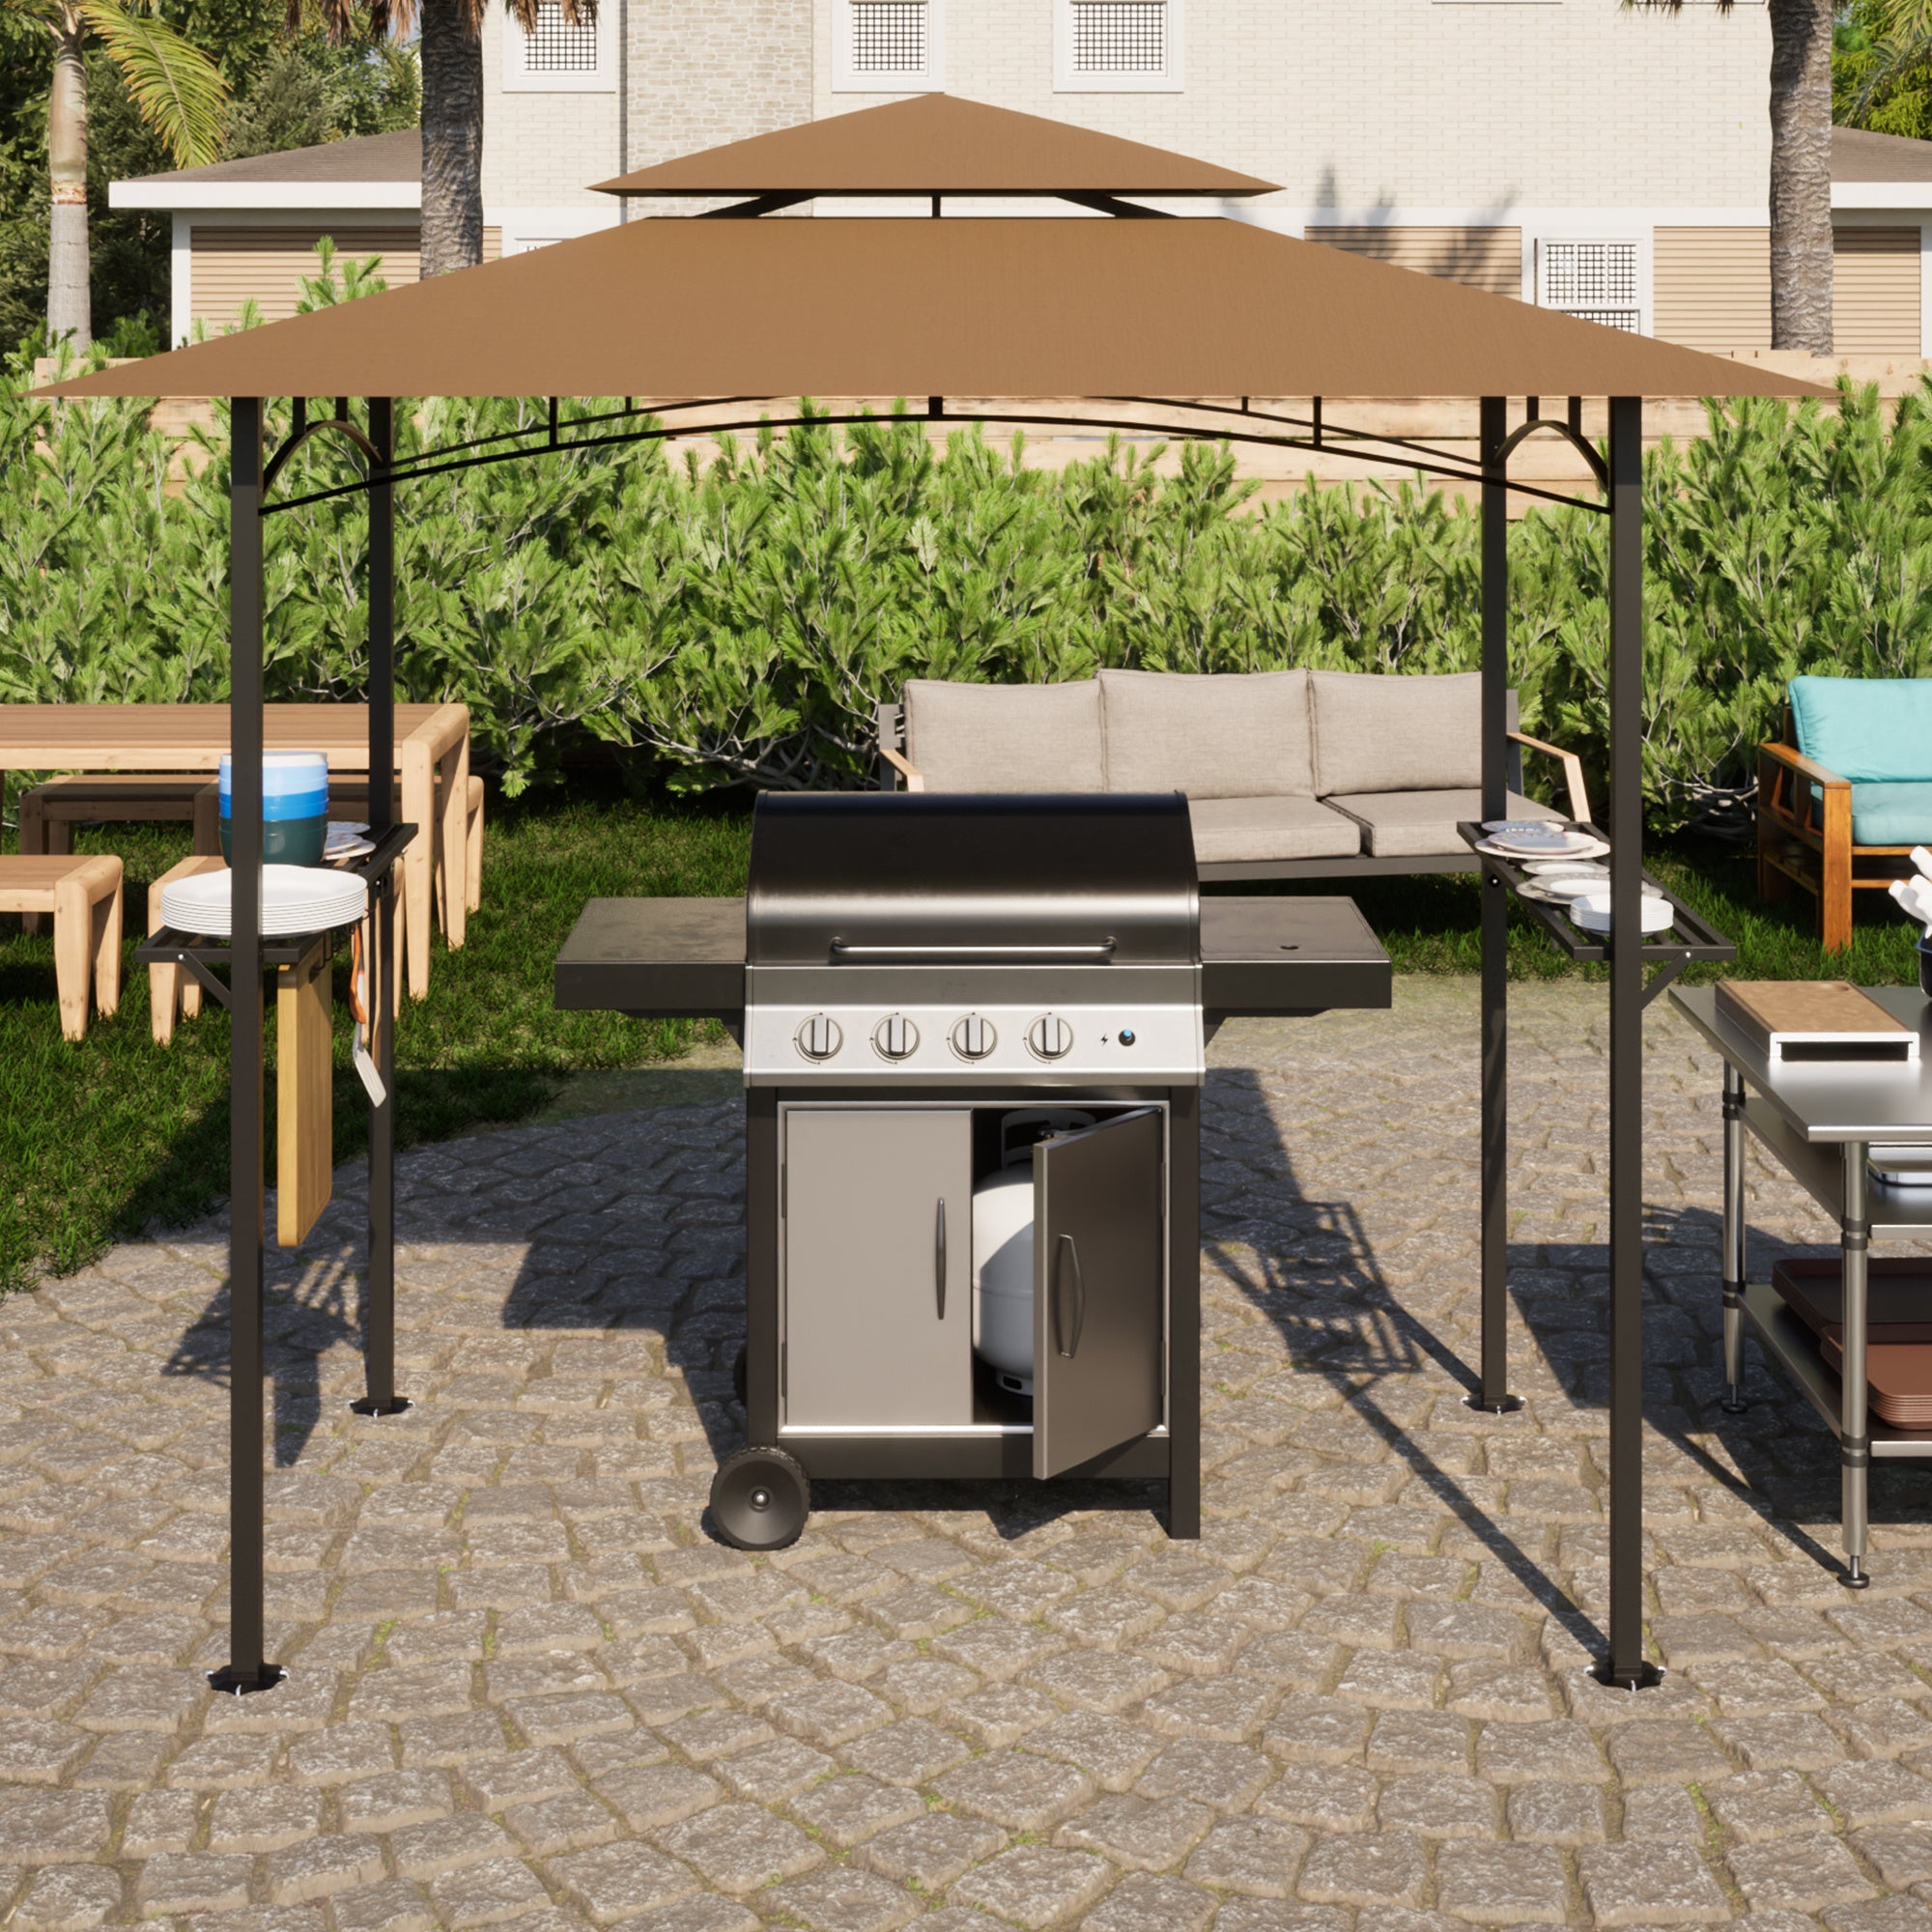 8x 5 FT Grill Canopy